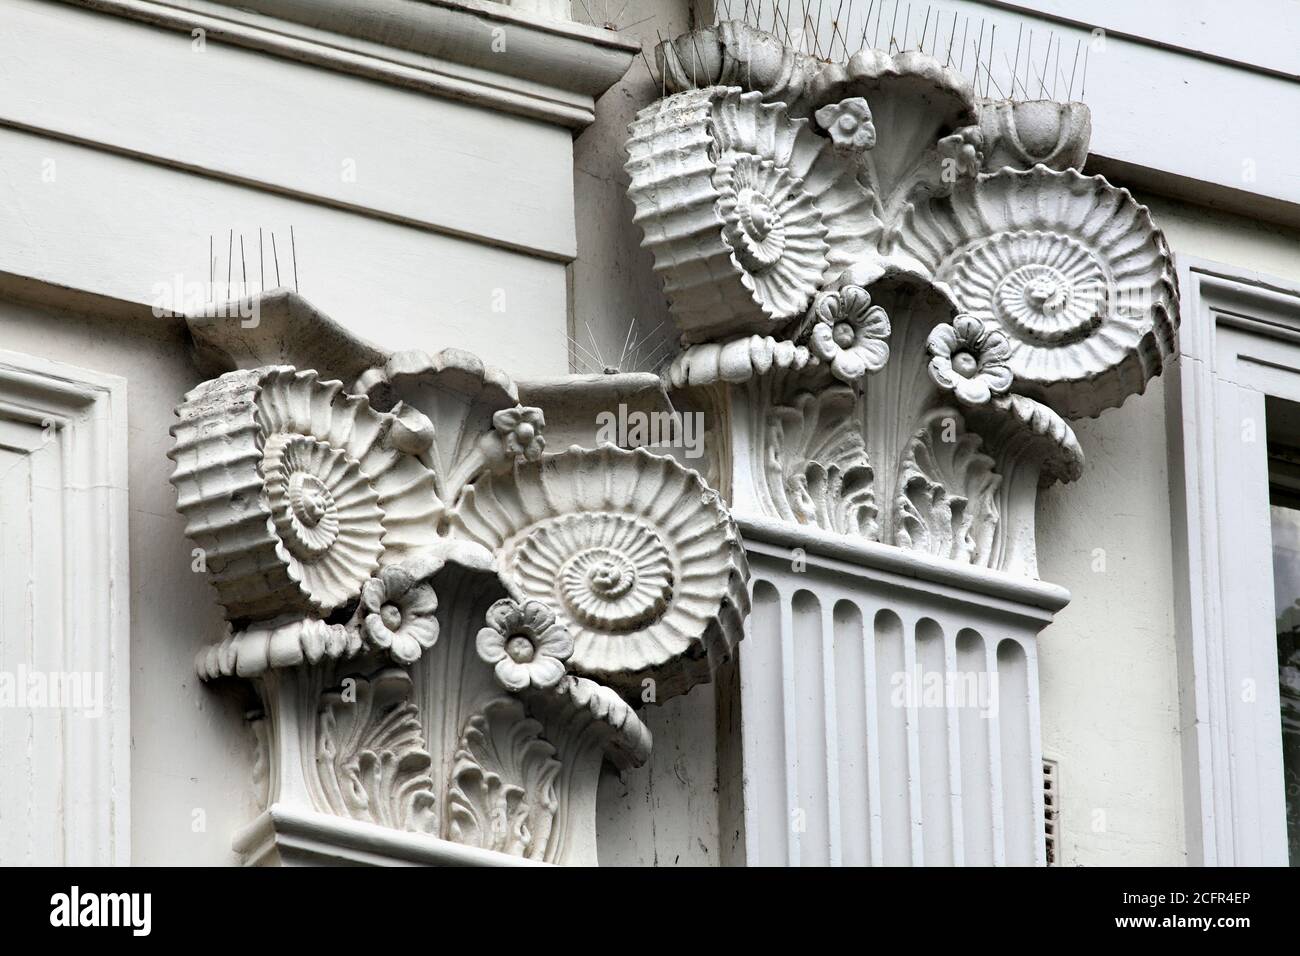 Ammonite capitals on adjoining houses, by architect Amon Henry Wilds, Montpelier Road, Brighton. Stock Photo